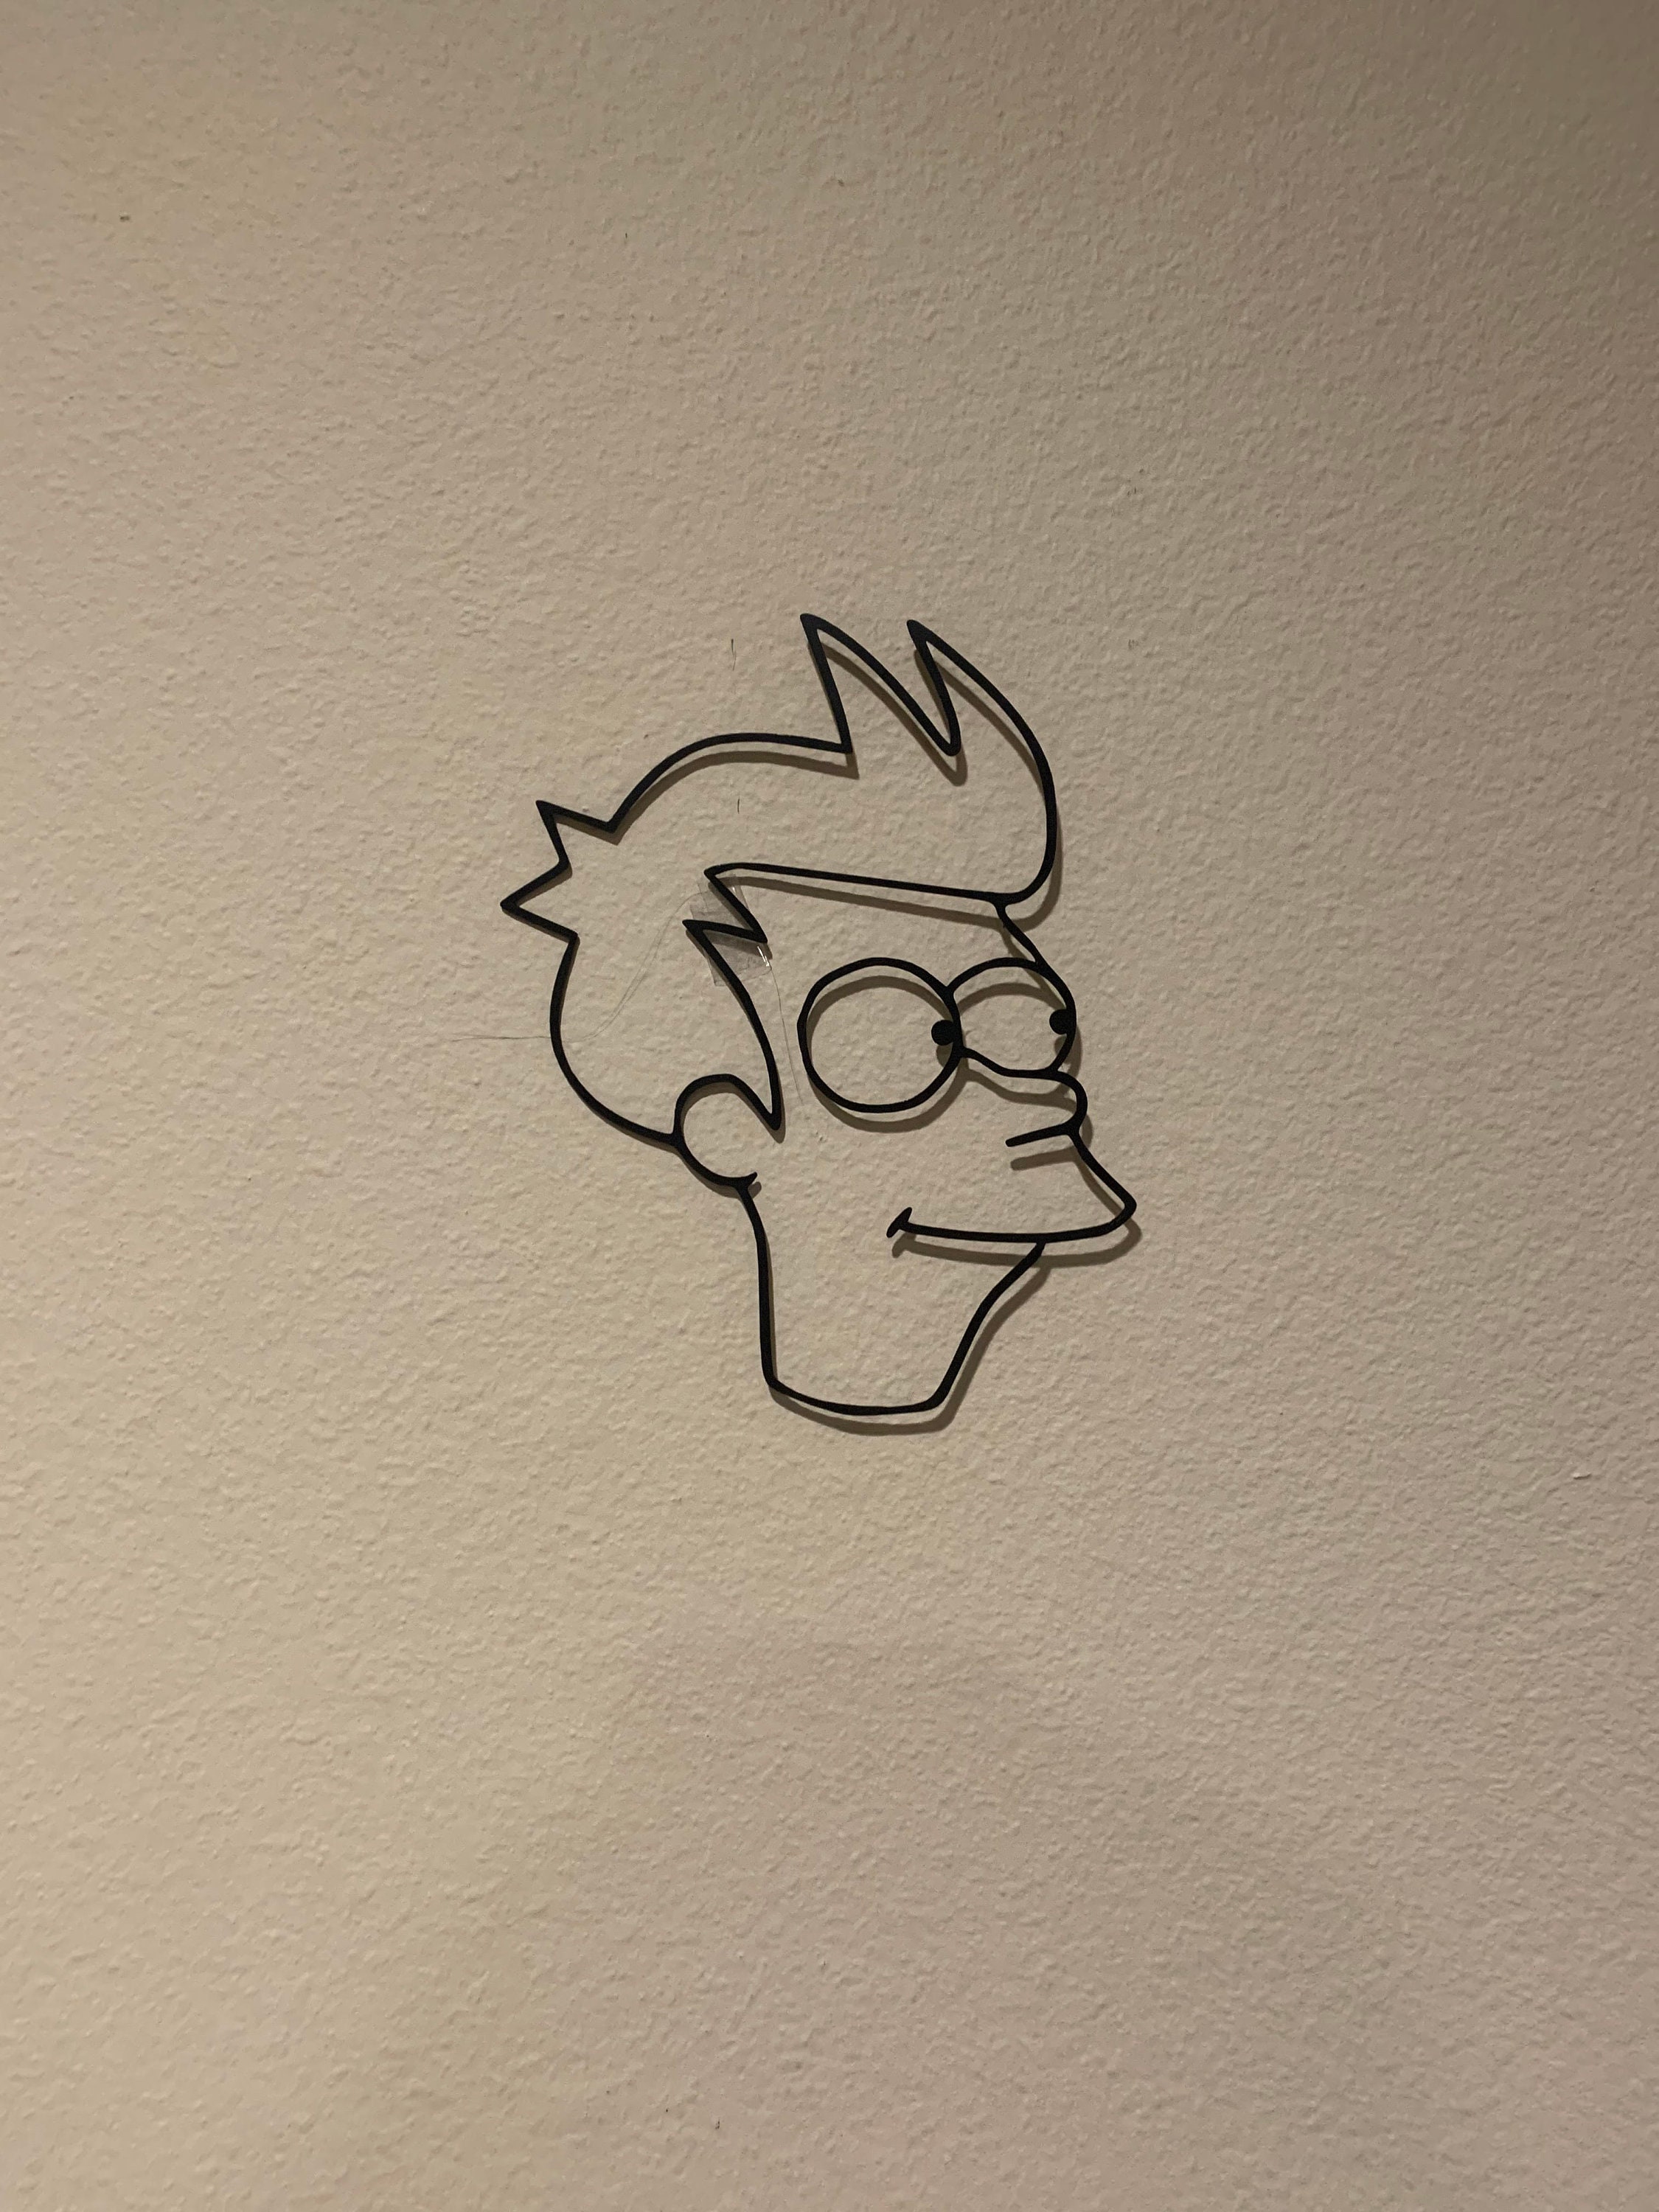 M I K Y H A R P E R on Instagram: [PHILIP J. FRY from FUTURAMA] Acrylic on  black paper sketchbook Art for Sale. You will get AI file, JPG and